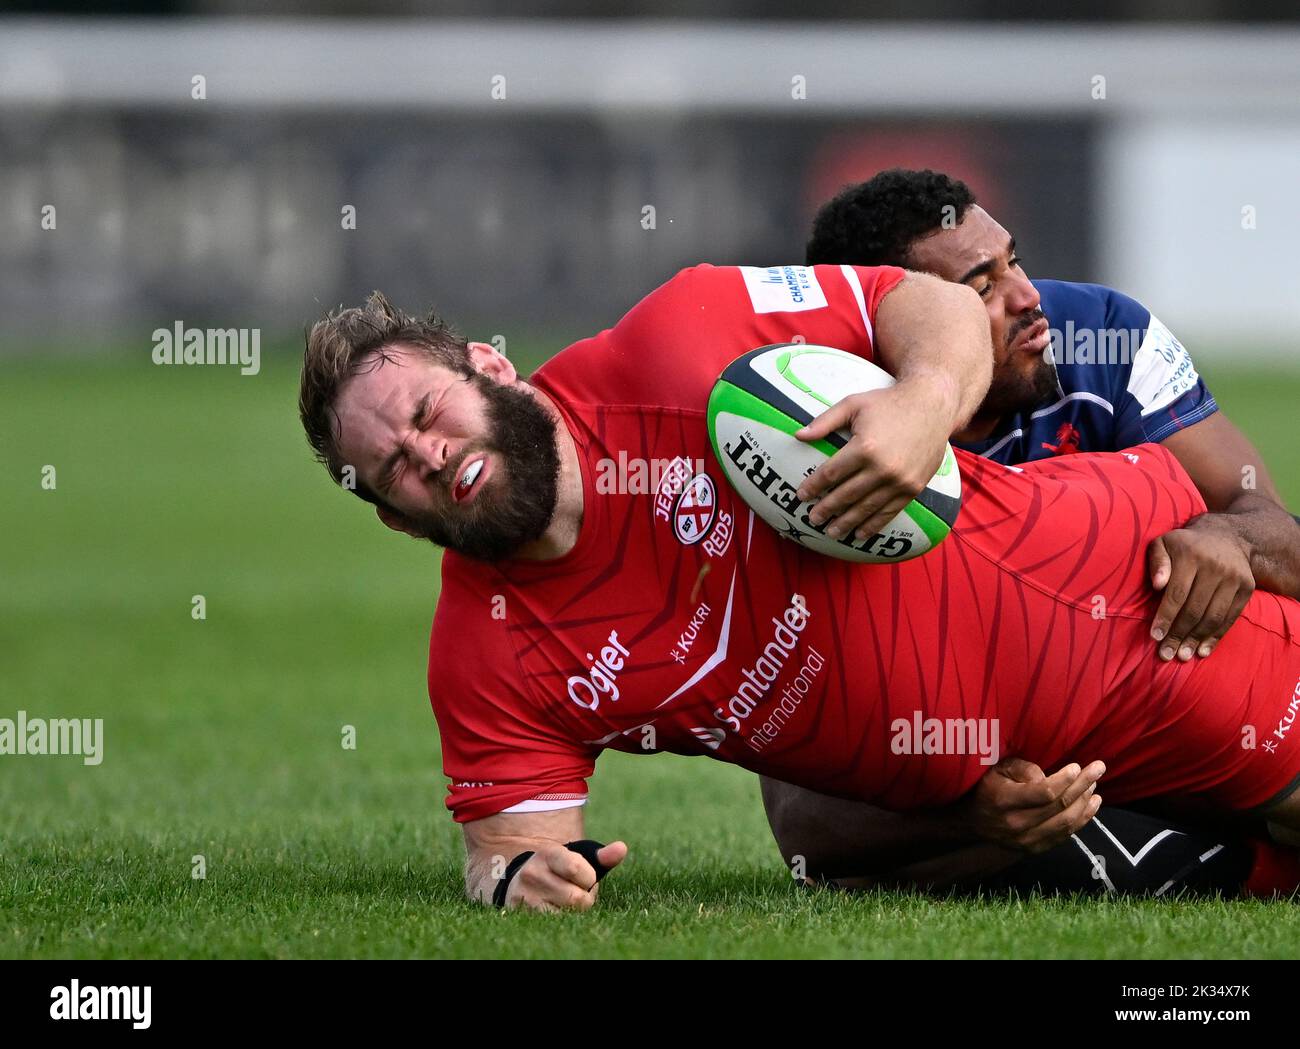 Richmond, United Kingdom. 24th Sep, 2022. Championship Rugby. London Scottish V Jersey Reds. The Richmond Athletic Ground. Richmond. Steve Longwell (Jersey Reds) is tackled by Cameron King (London Scottish) during the London Scottish V Jersey Reds championship rugby match. Credit: Sport In Pictures/Alamy Live News Stock Photo